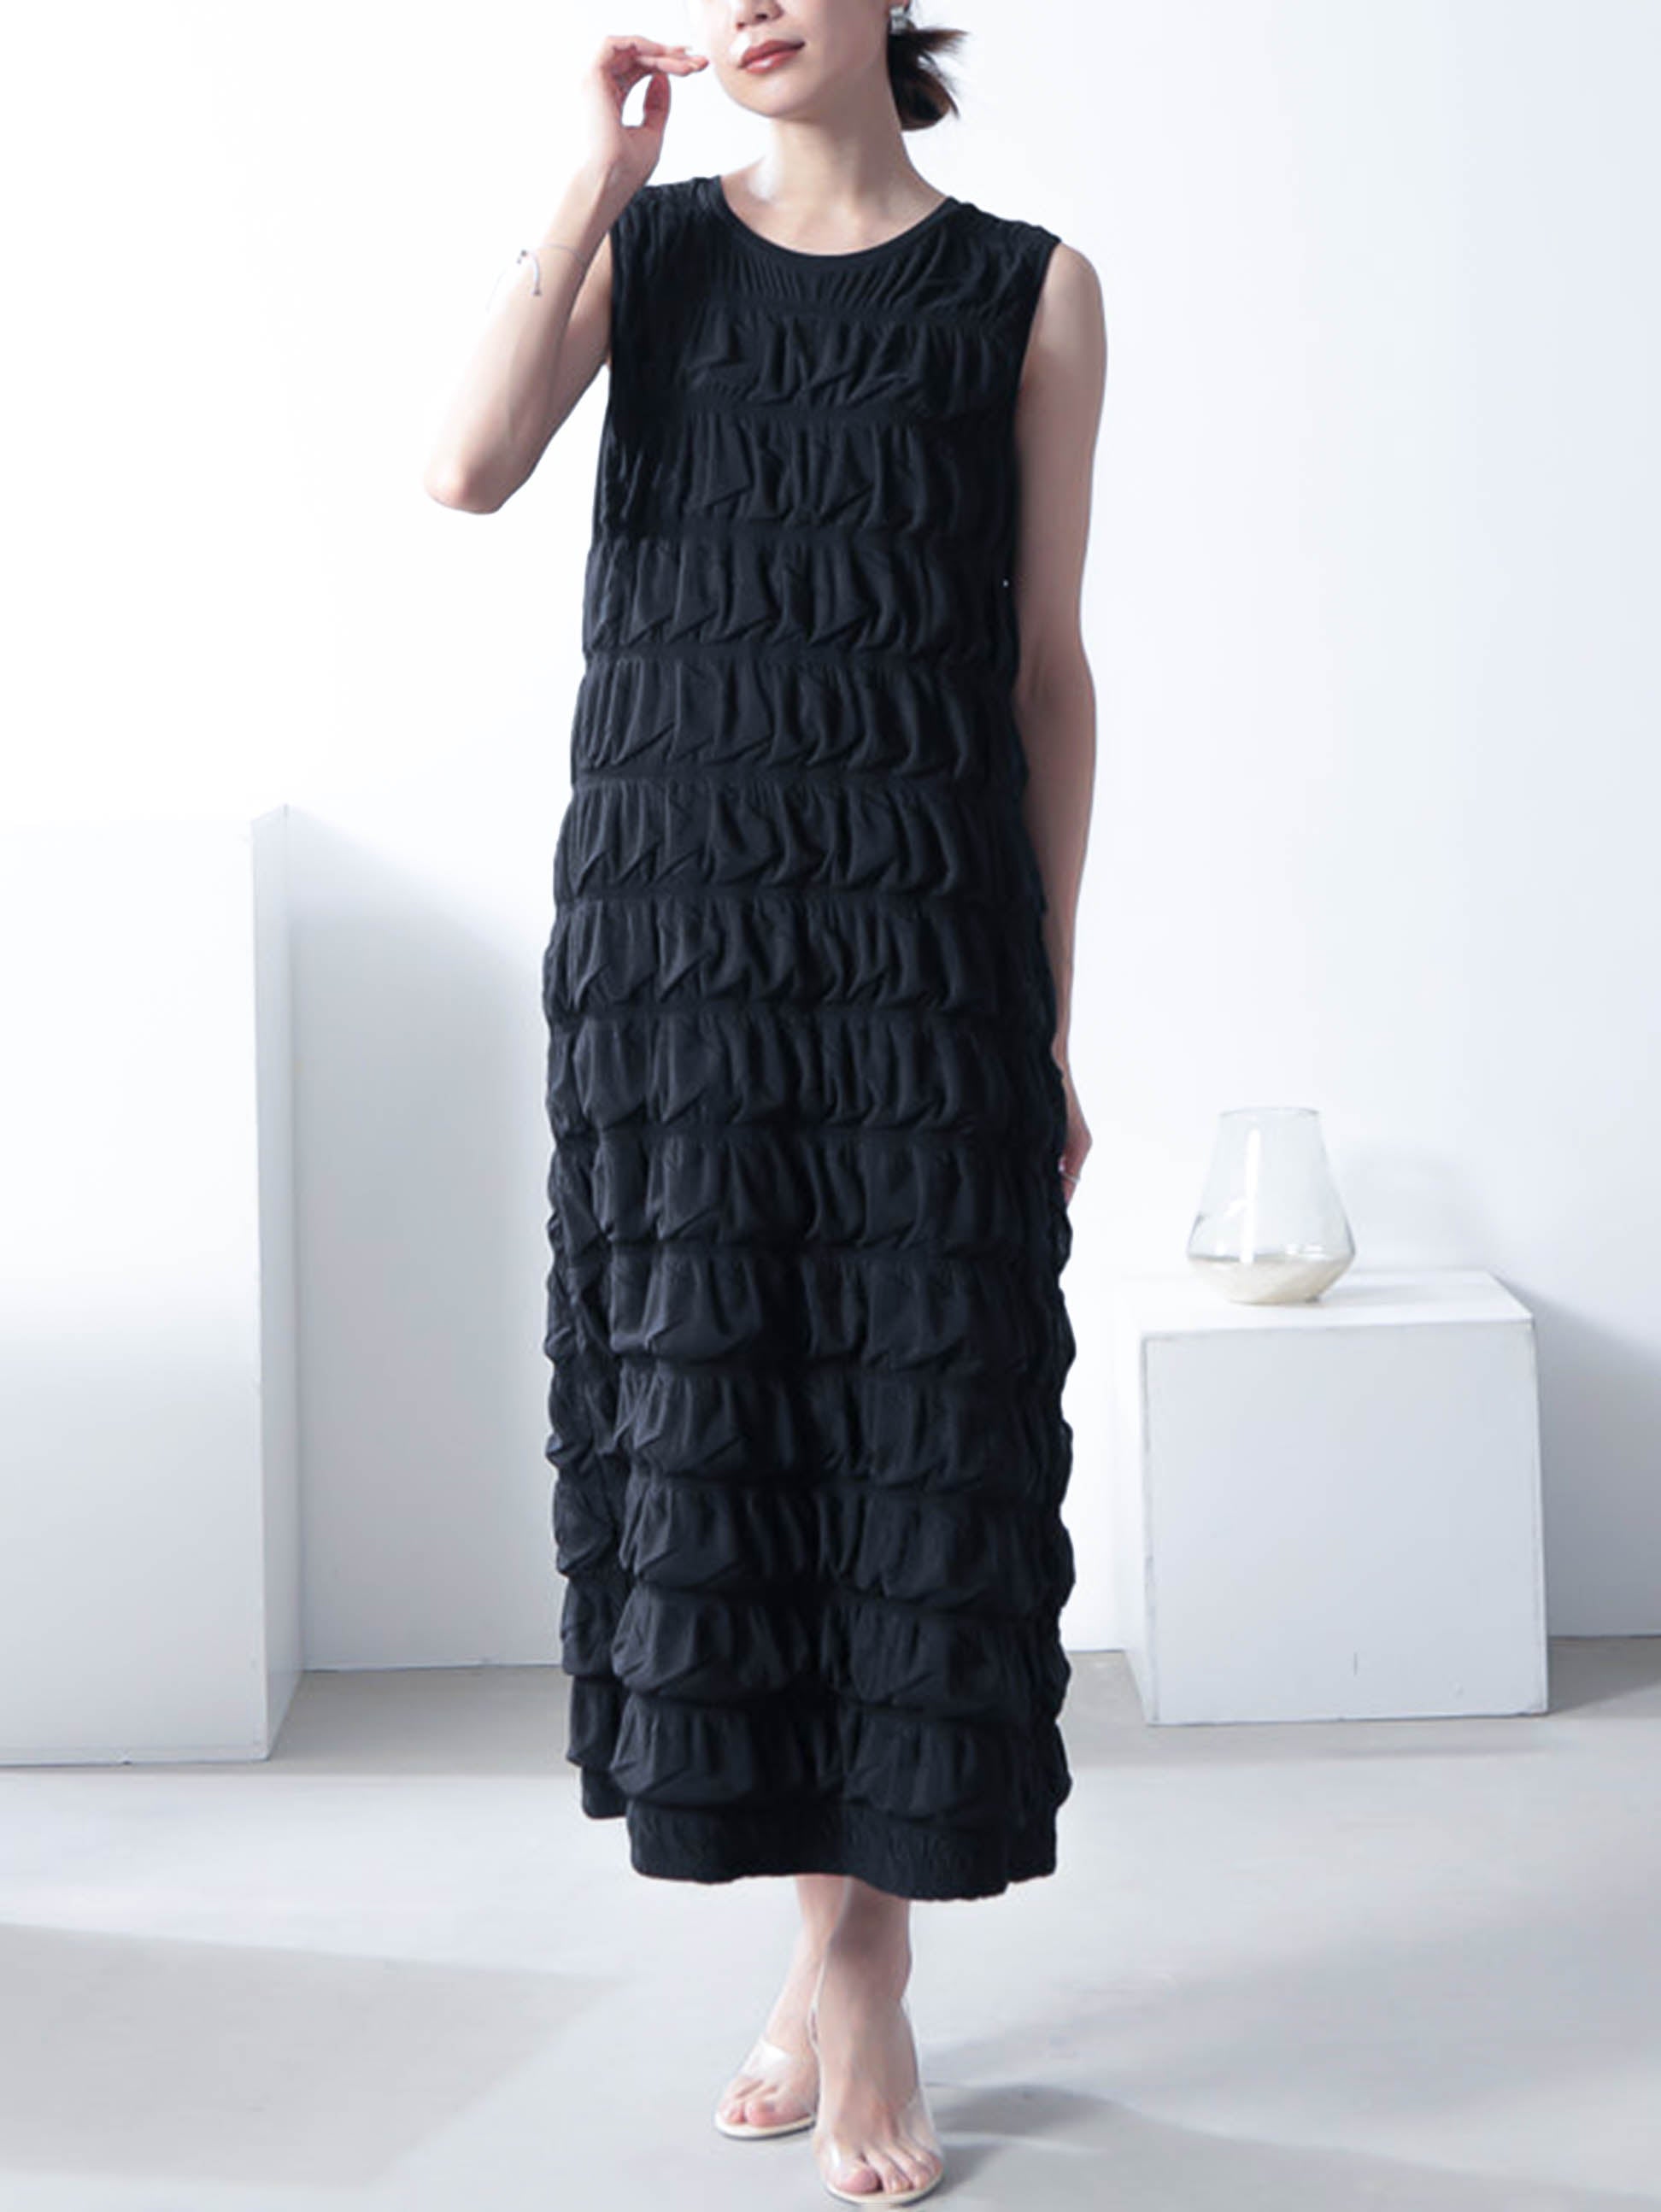 Dress made of uneven fabric